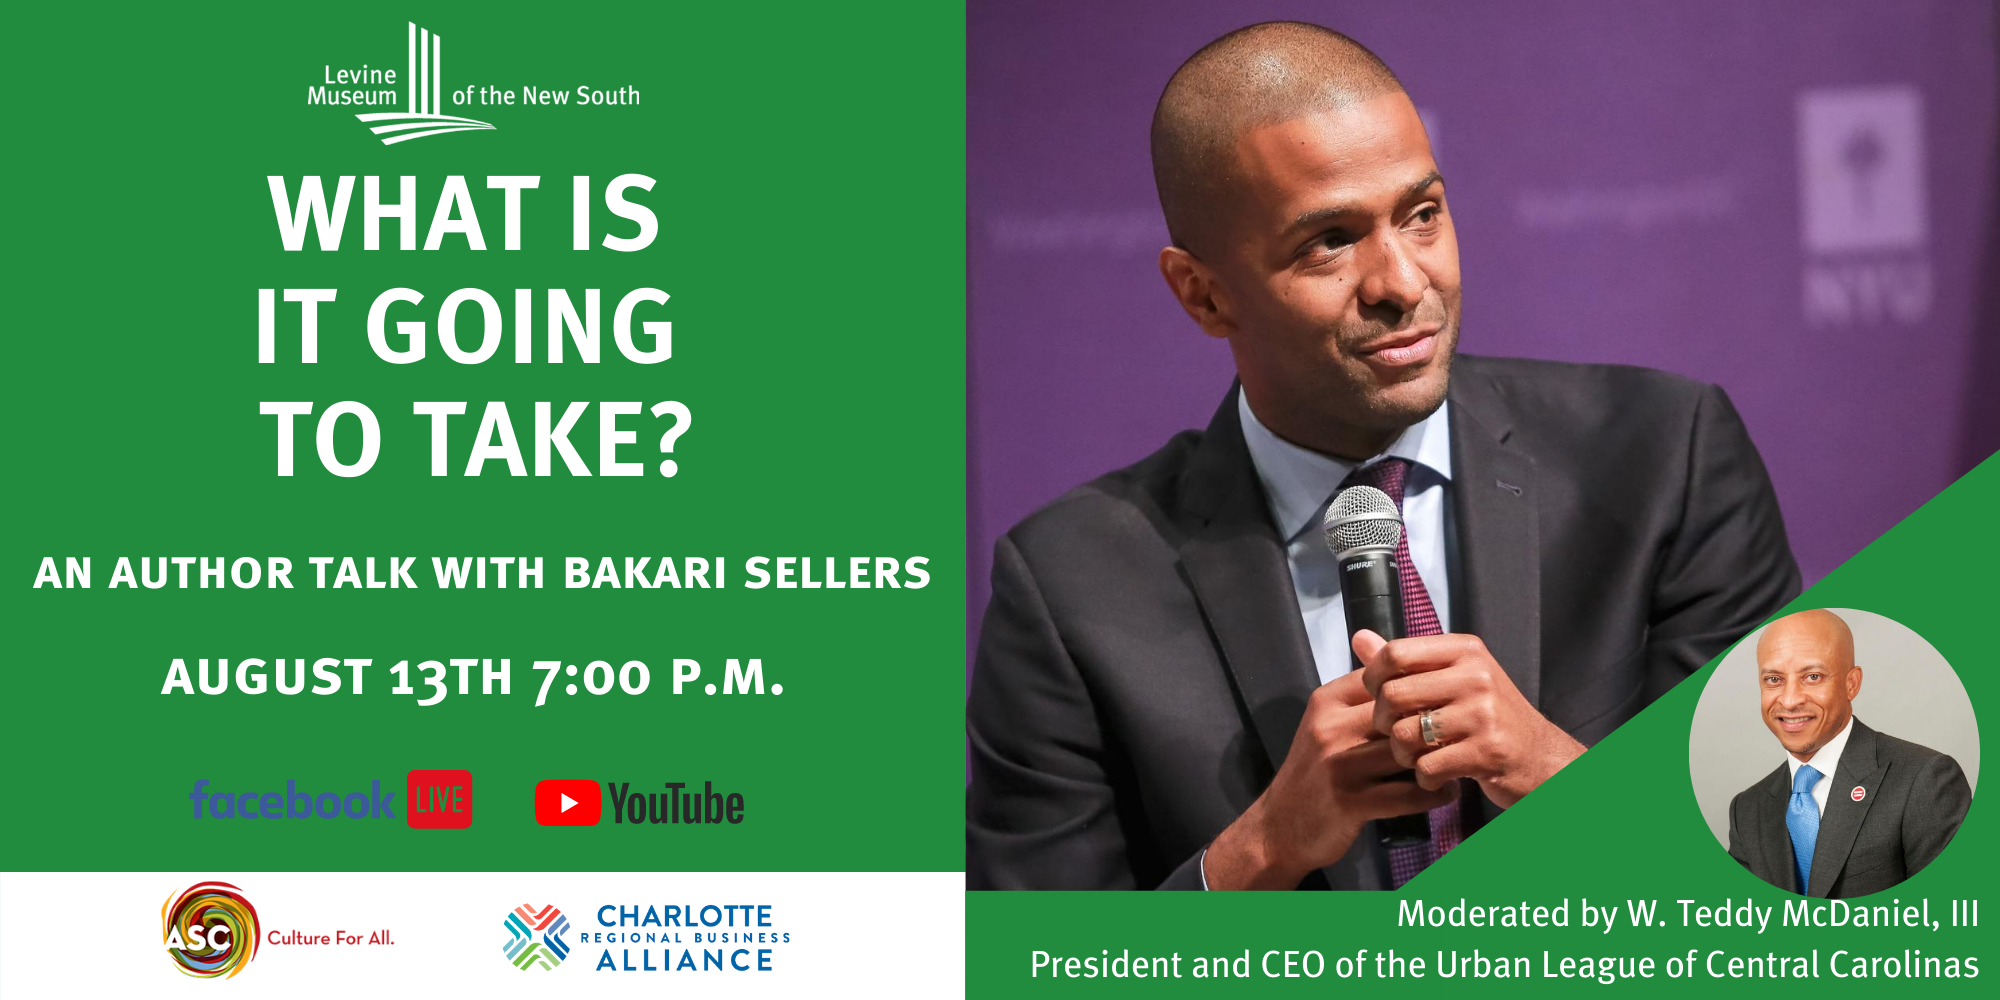 Levine Museum of the New South What Is It Going To Take? An Author Talk With Bakari Sellers Event Image